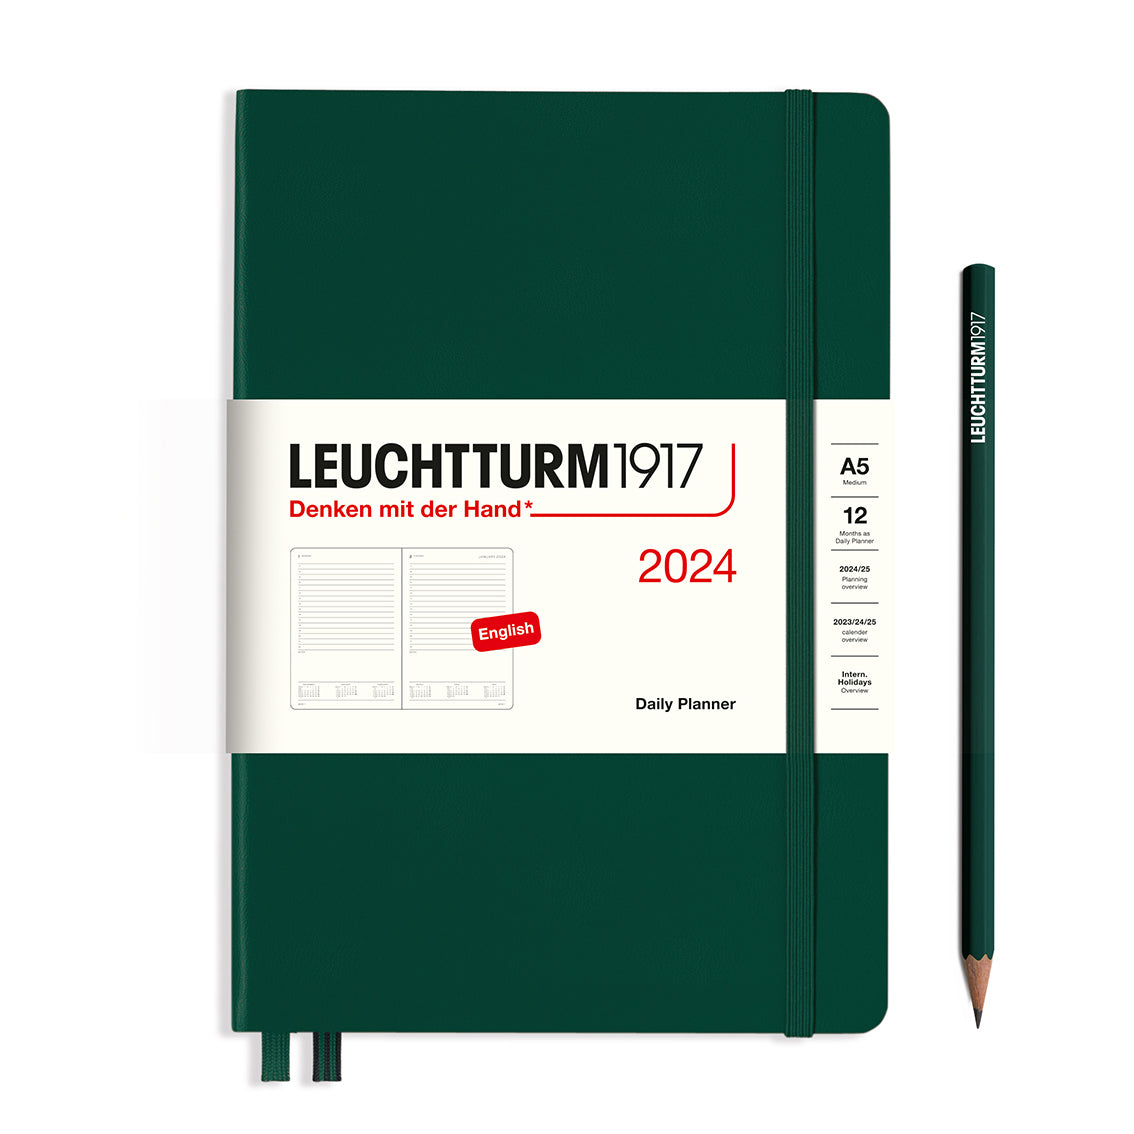 An image of a dark green planner with a dark green elastic band holding it together and a cream paper wrap around the middle stating the business name Leuchtturm1917, that it is for the year 2024, it is a daily planner, is A5 in size and an English language version. It has an image on the wrap showing the inside layout which is 1 day per page. A dark green pencil is shown at the side of the planner.